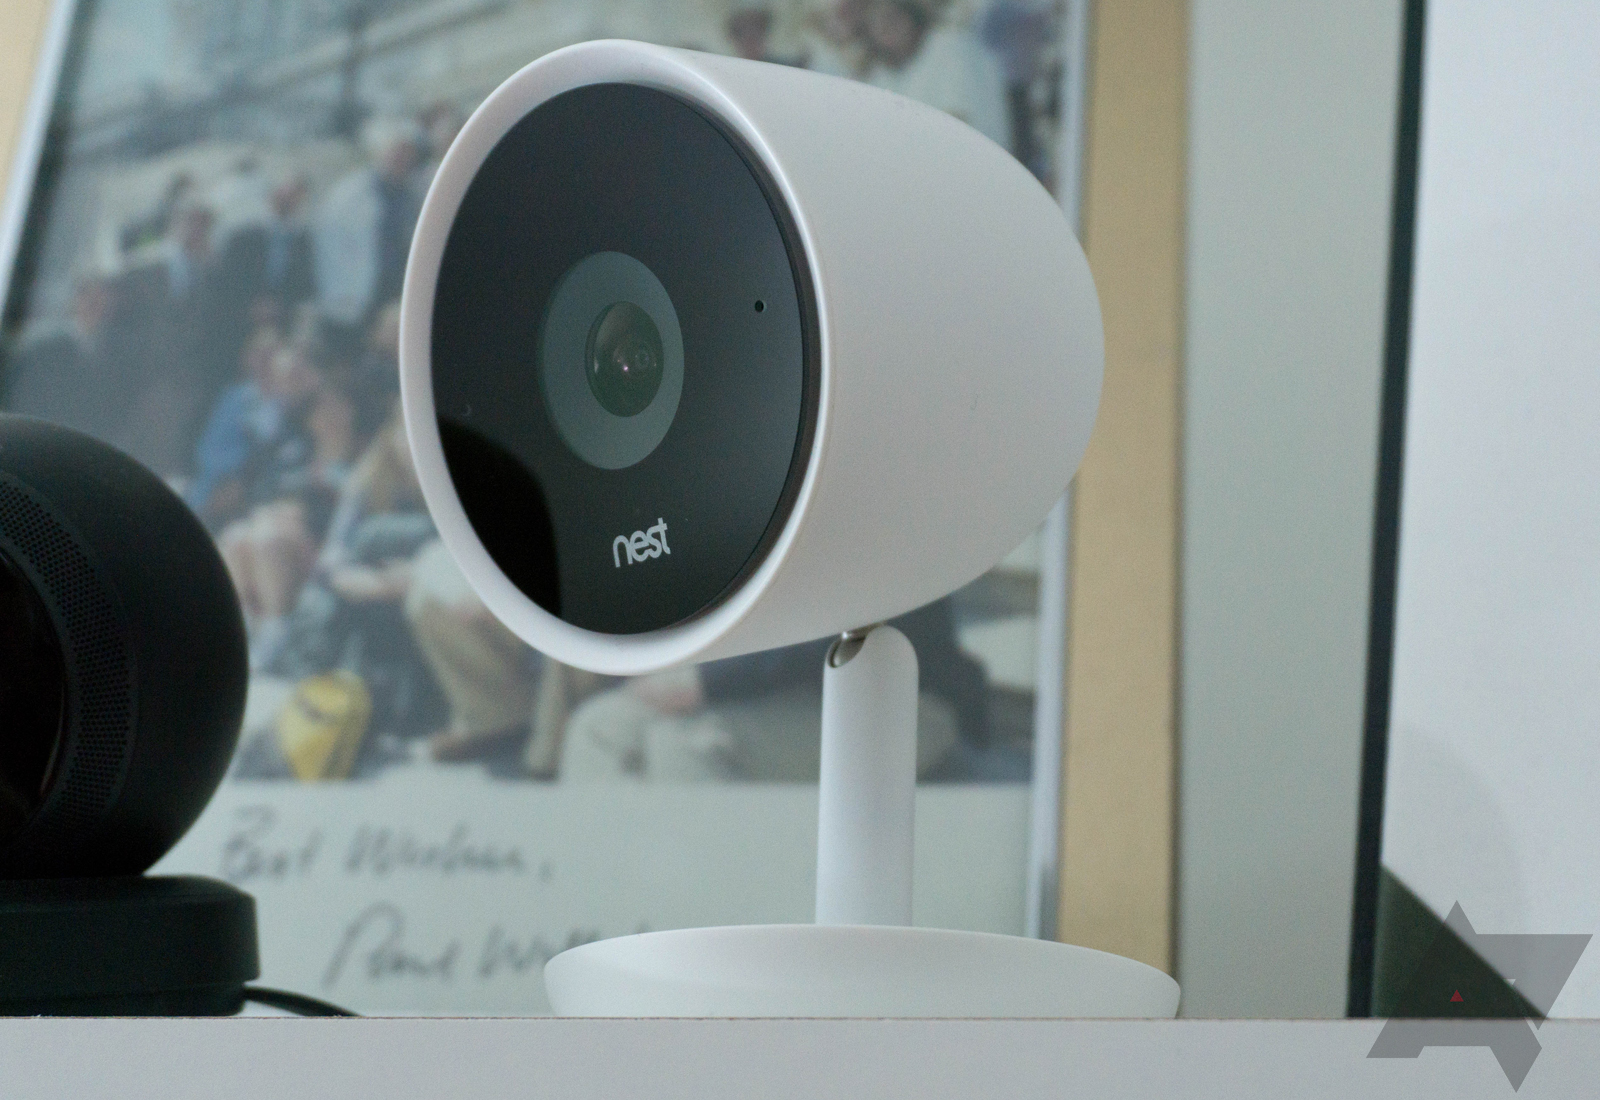 Nest is downgrading the video quality of its cameras to reduce internet strain, when they’re not broken entirely